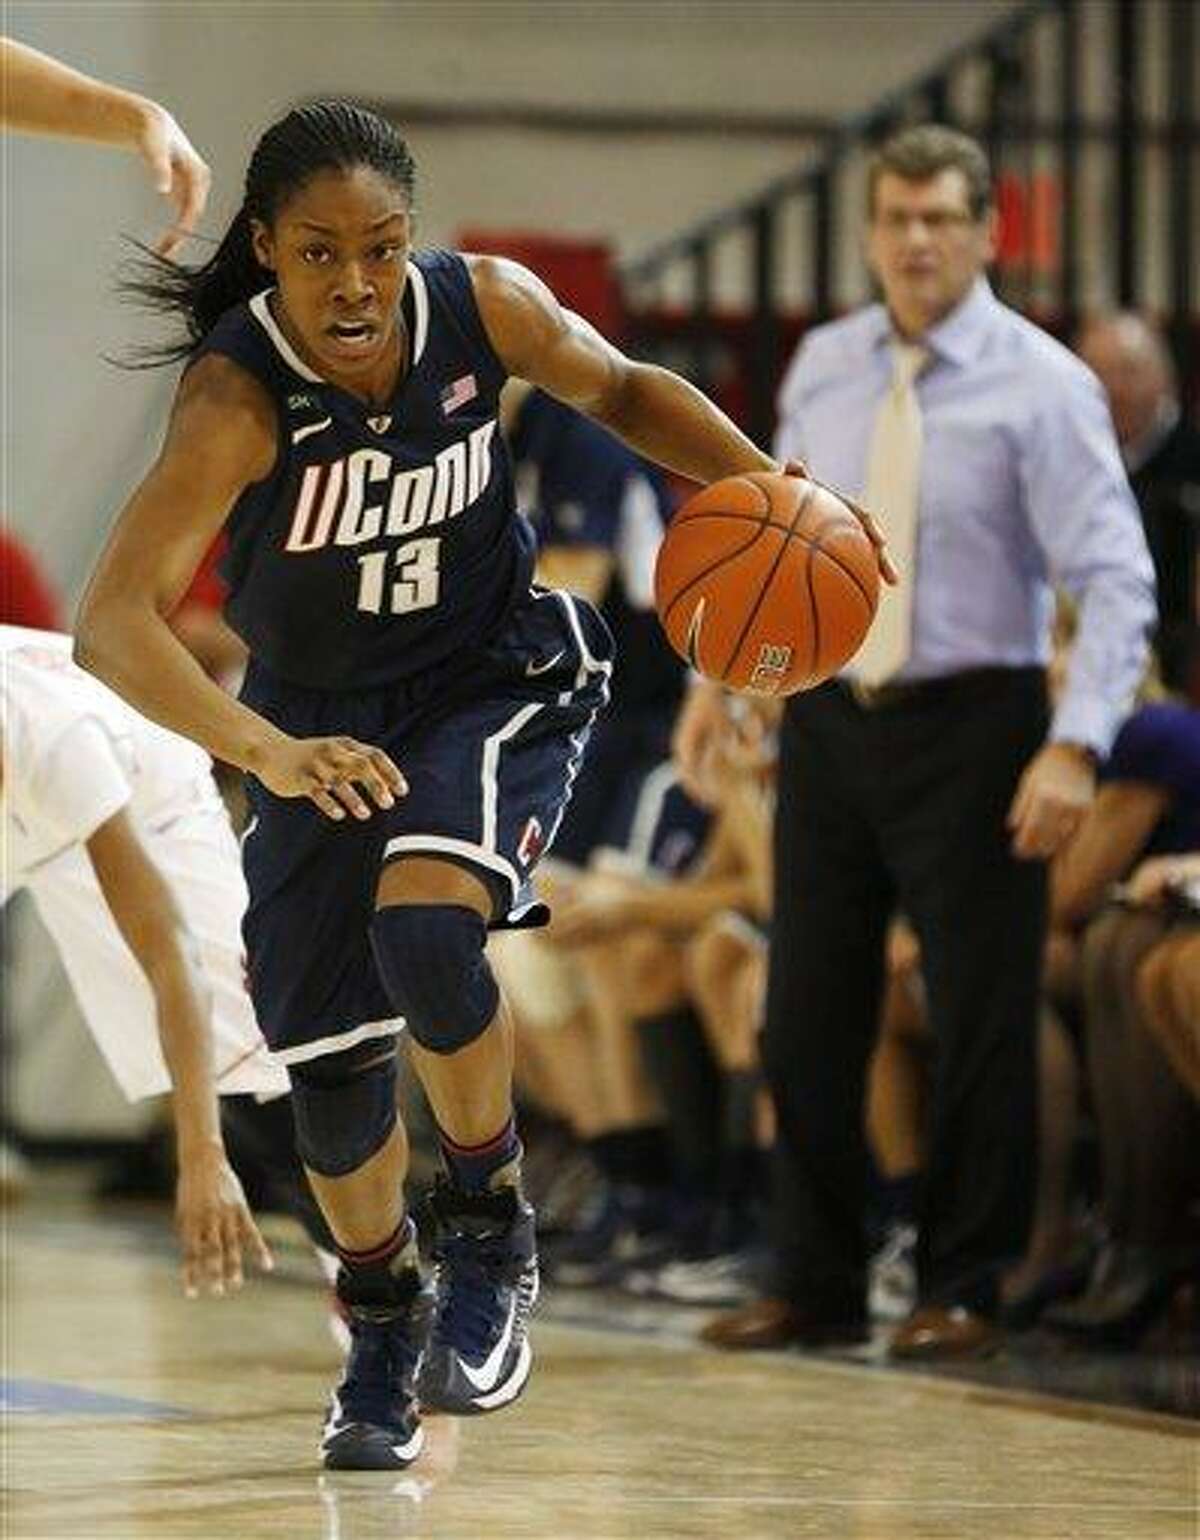 Connecticut guard Brianna Banks (13) breaks away during the first half of a NCAA college basketball game against St. John's, Saturday, Feb. 2, 2013, at St. John's University in New York. (AP Photo/John Minchillo)